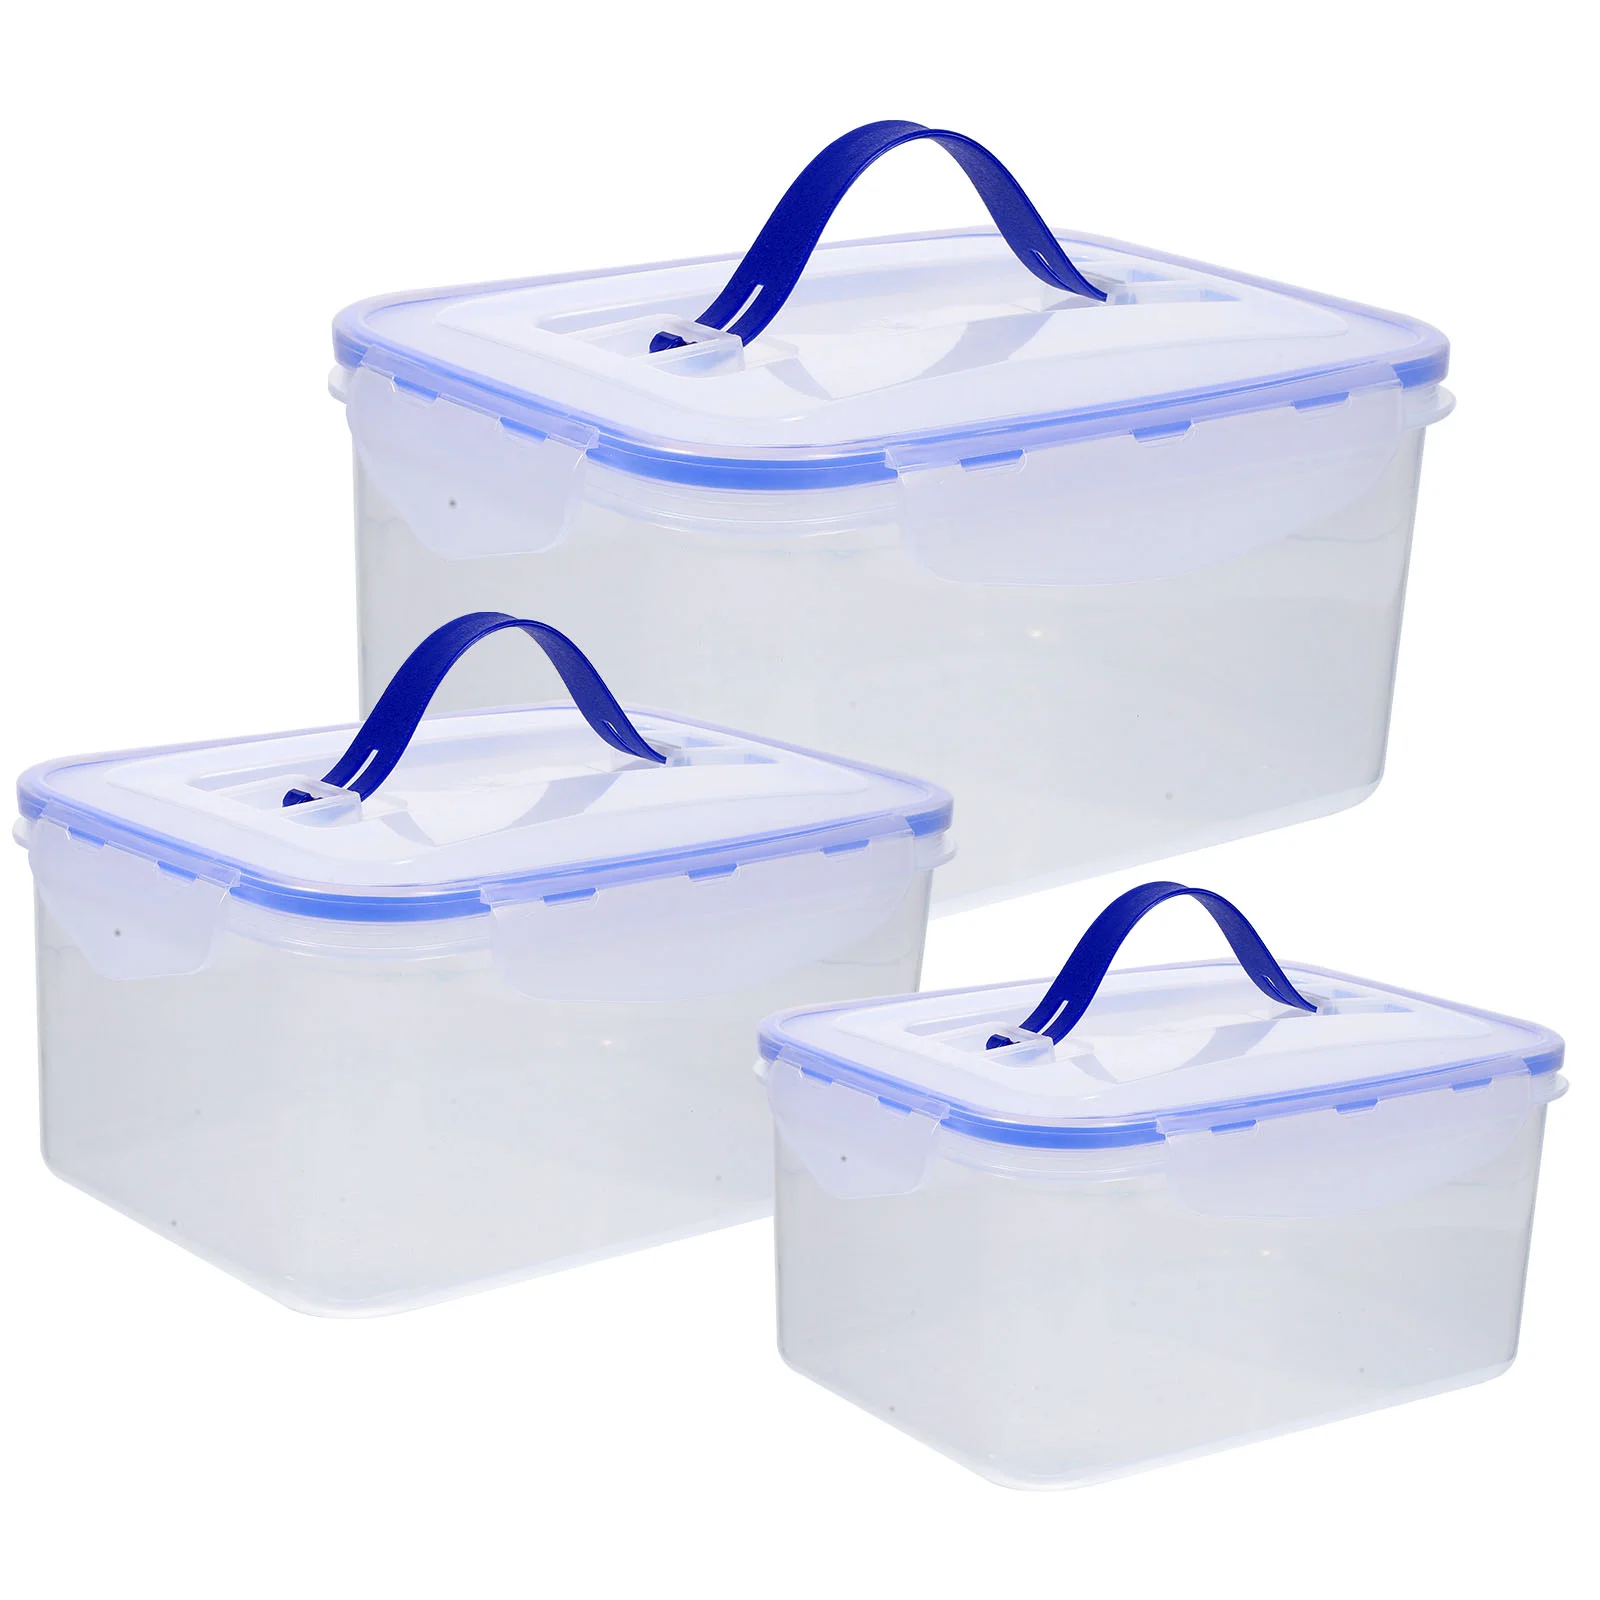 

3 Pcs Food Containers Handle Kitchen Airtight Beans Storage Large Pp Plastic Grain Canister